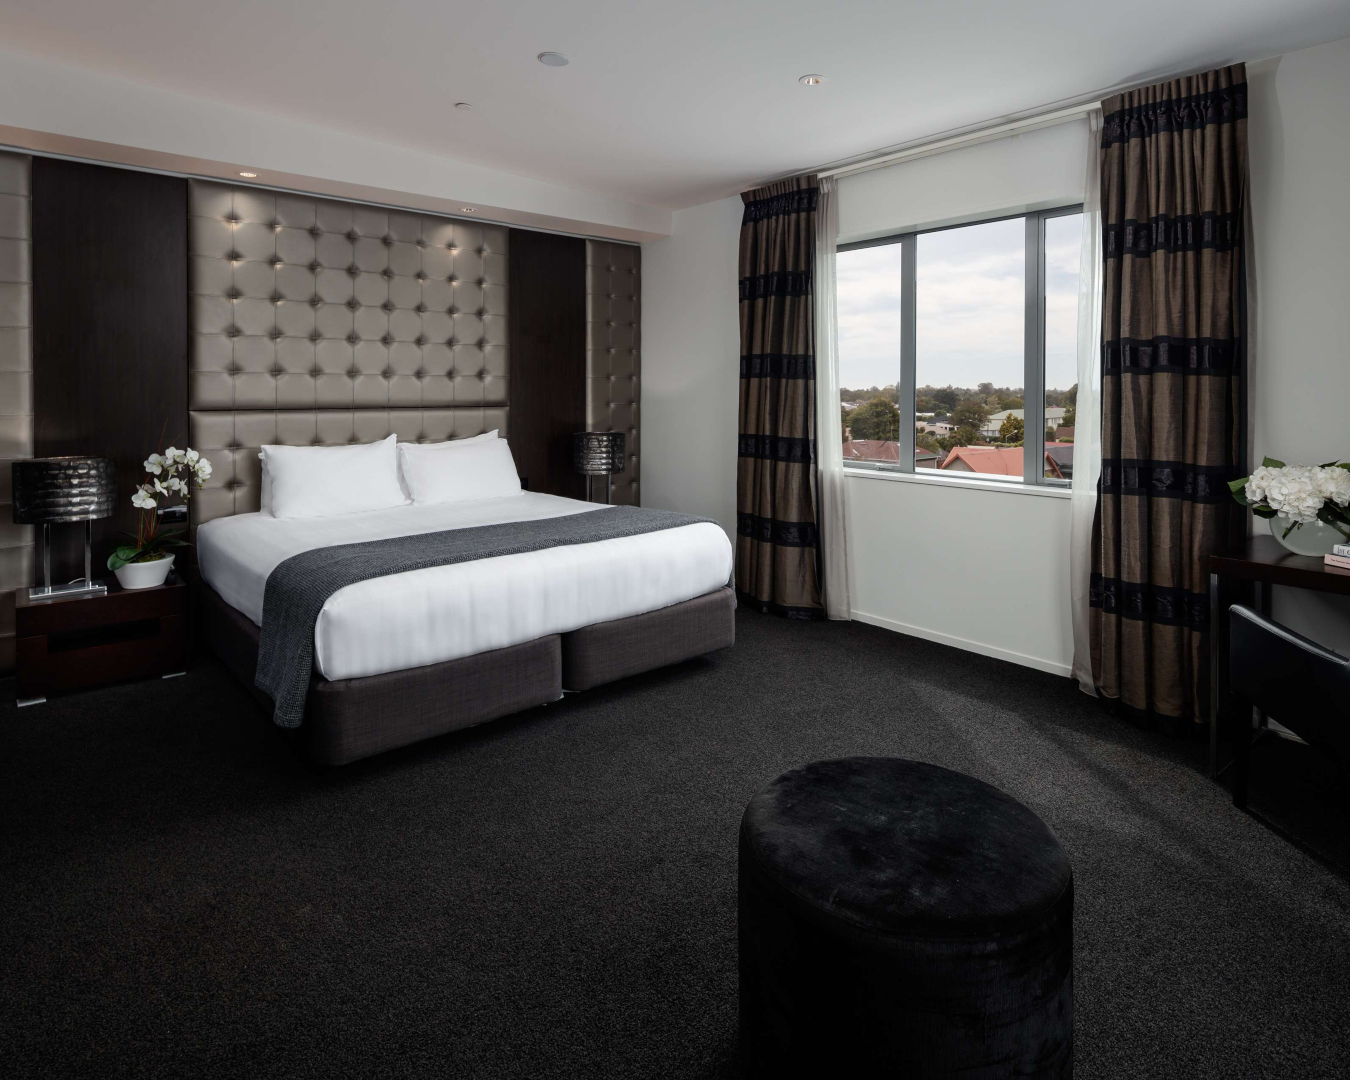 Classy and stylish, a room at The Rydges is decked out with luxurious monochromatic decor 